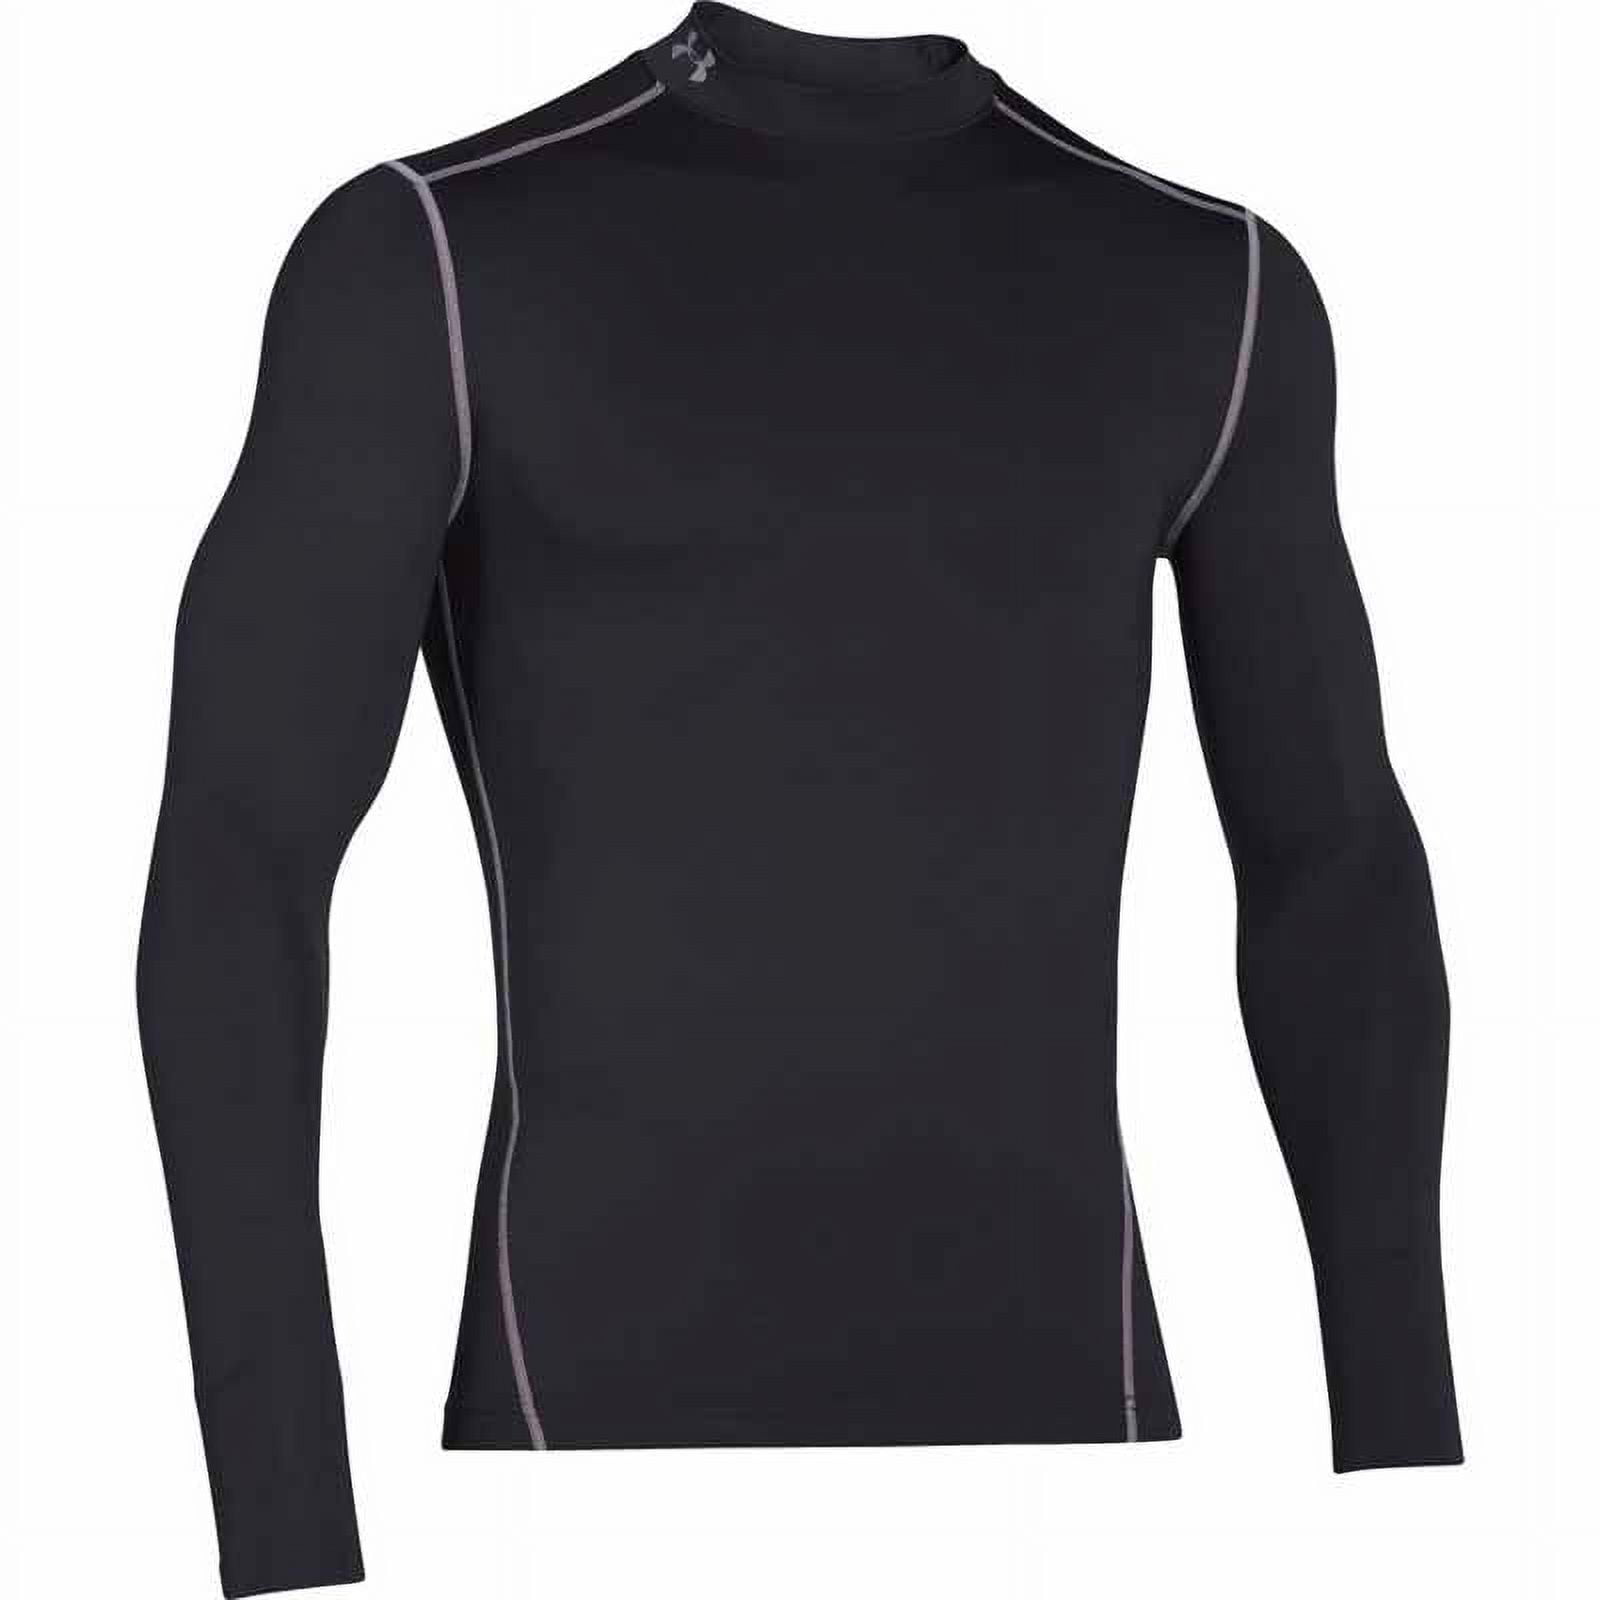  Under Armour Men's ColdGear Armour Compression Mock, Black  (001)/White, Small : Clothing, Shoes & Jewelry